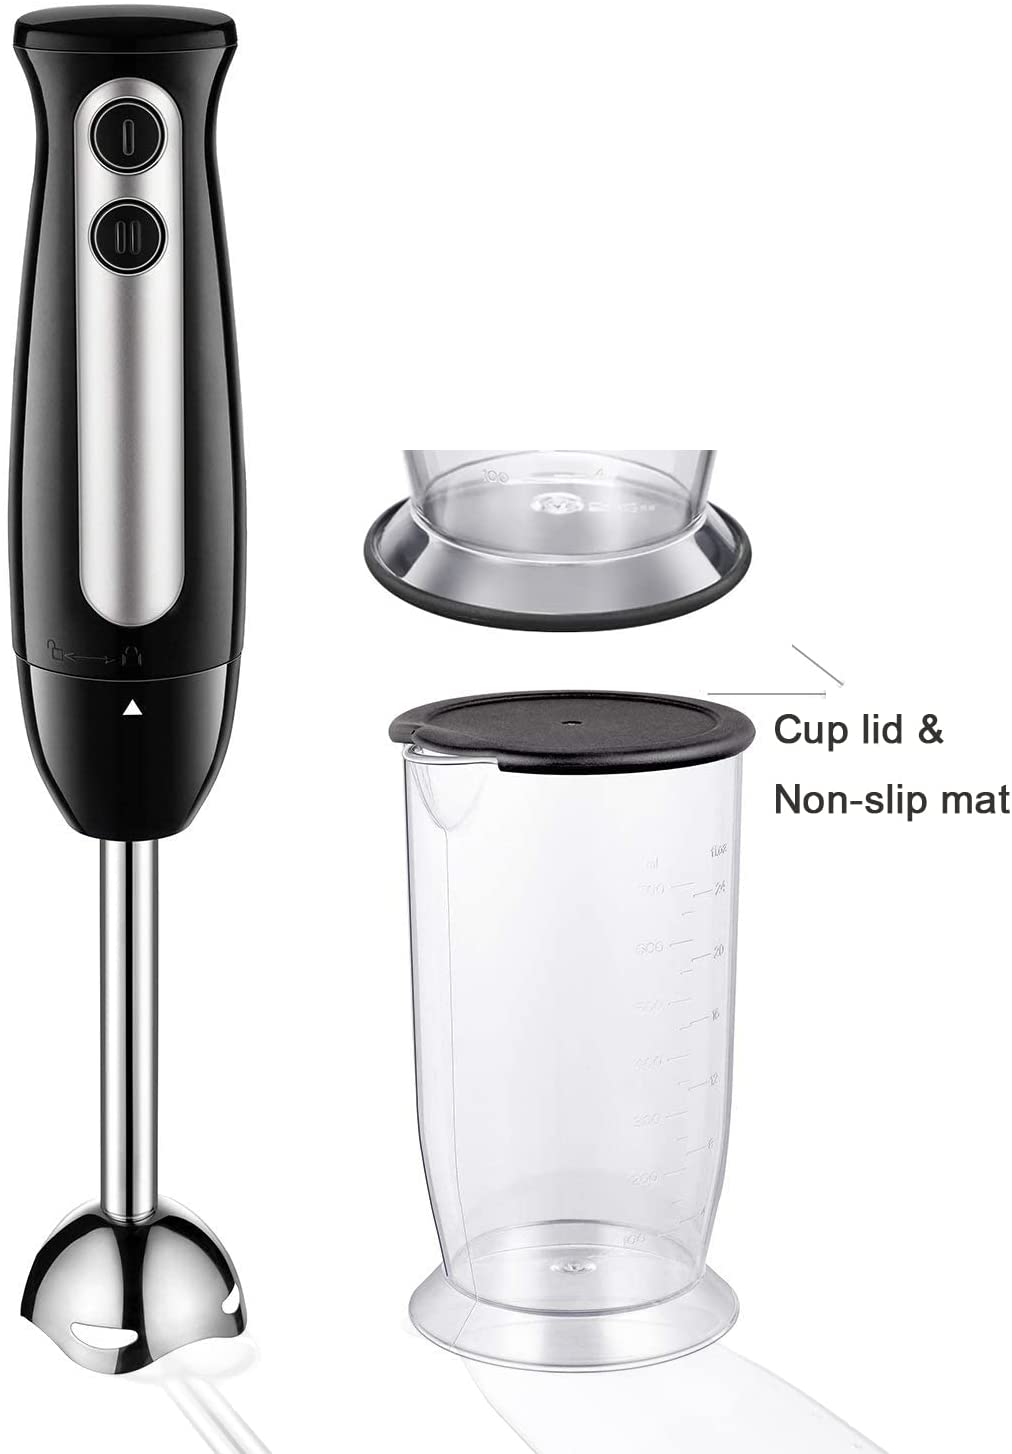 Hand Blender with 700ml Beaker, Stick Immersion Blender 400W, 2-Speed Hand held Blender for Baby Food, Juices, Sauces and Soup, BPA Free